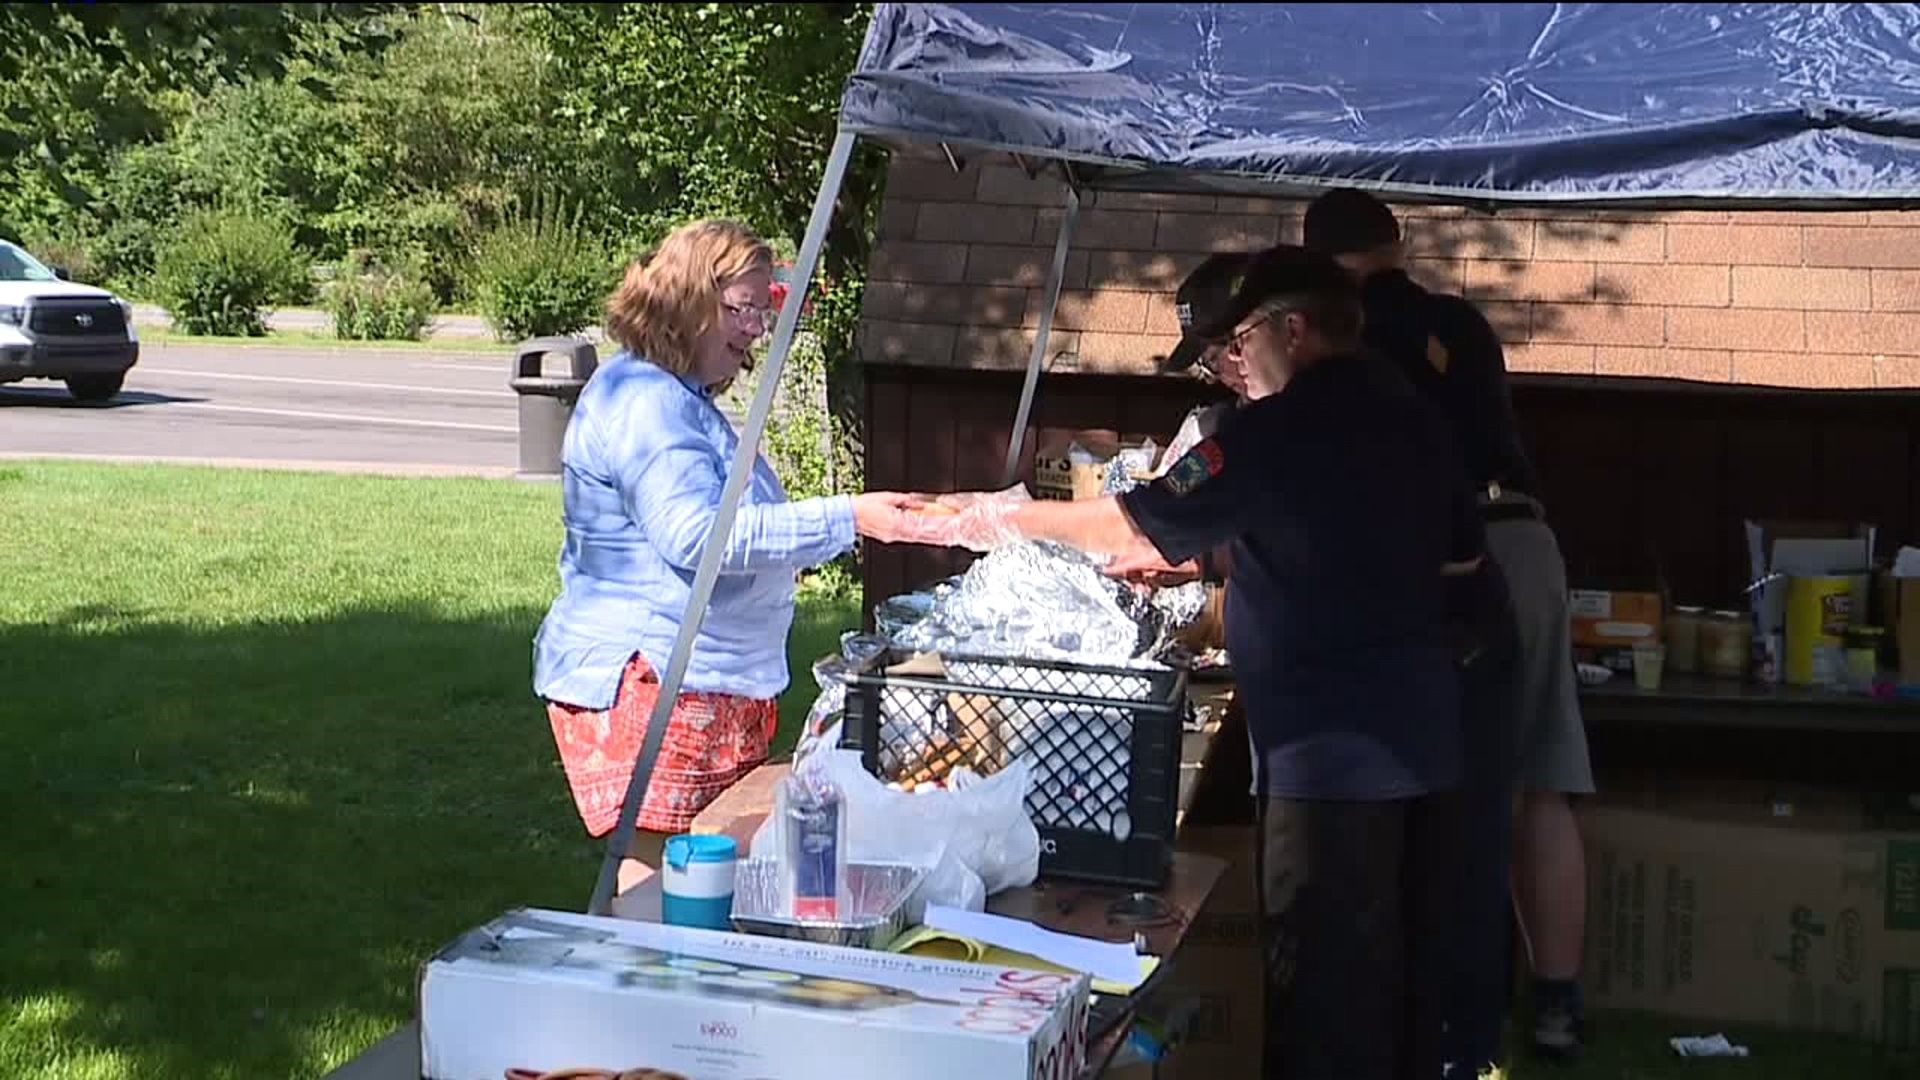 Refreshments for Labor Day Travelers at Luzerne County Rest Stop